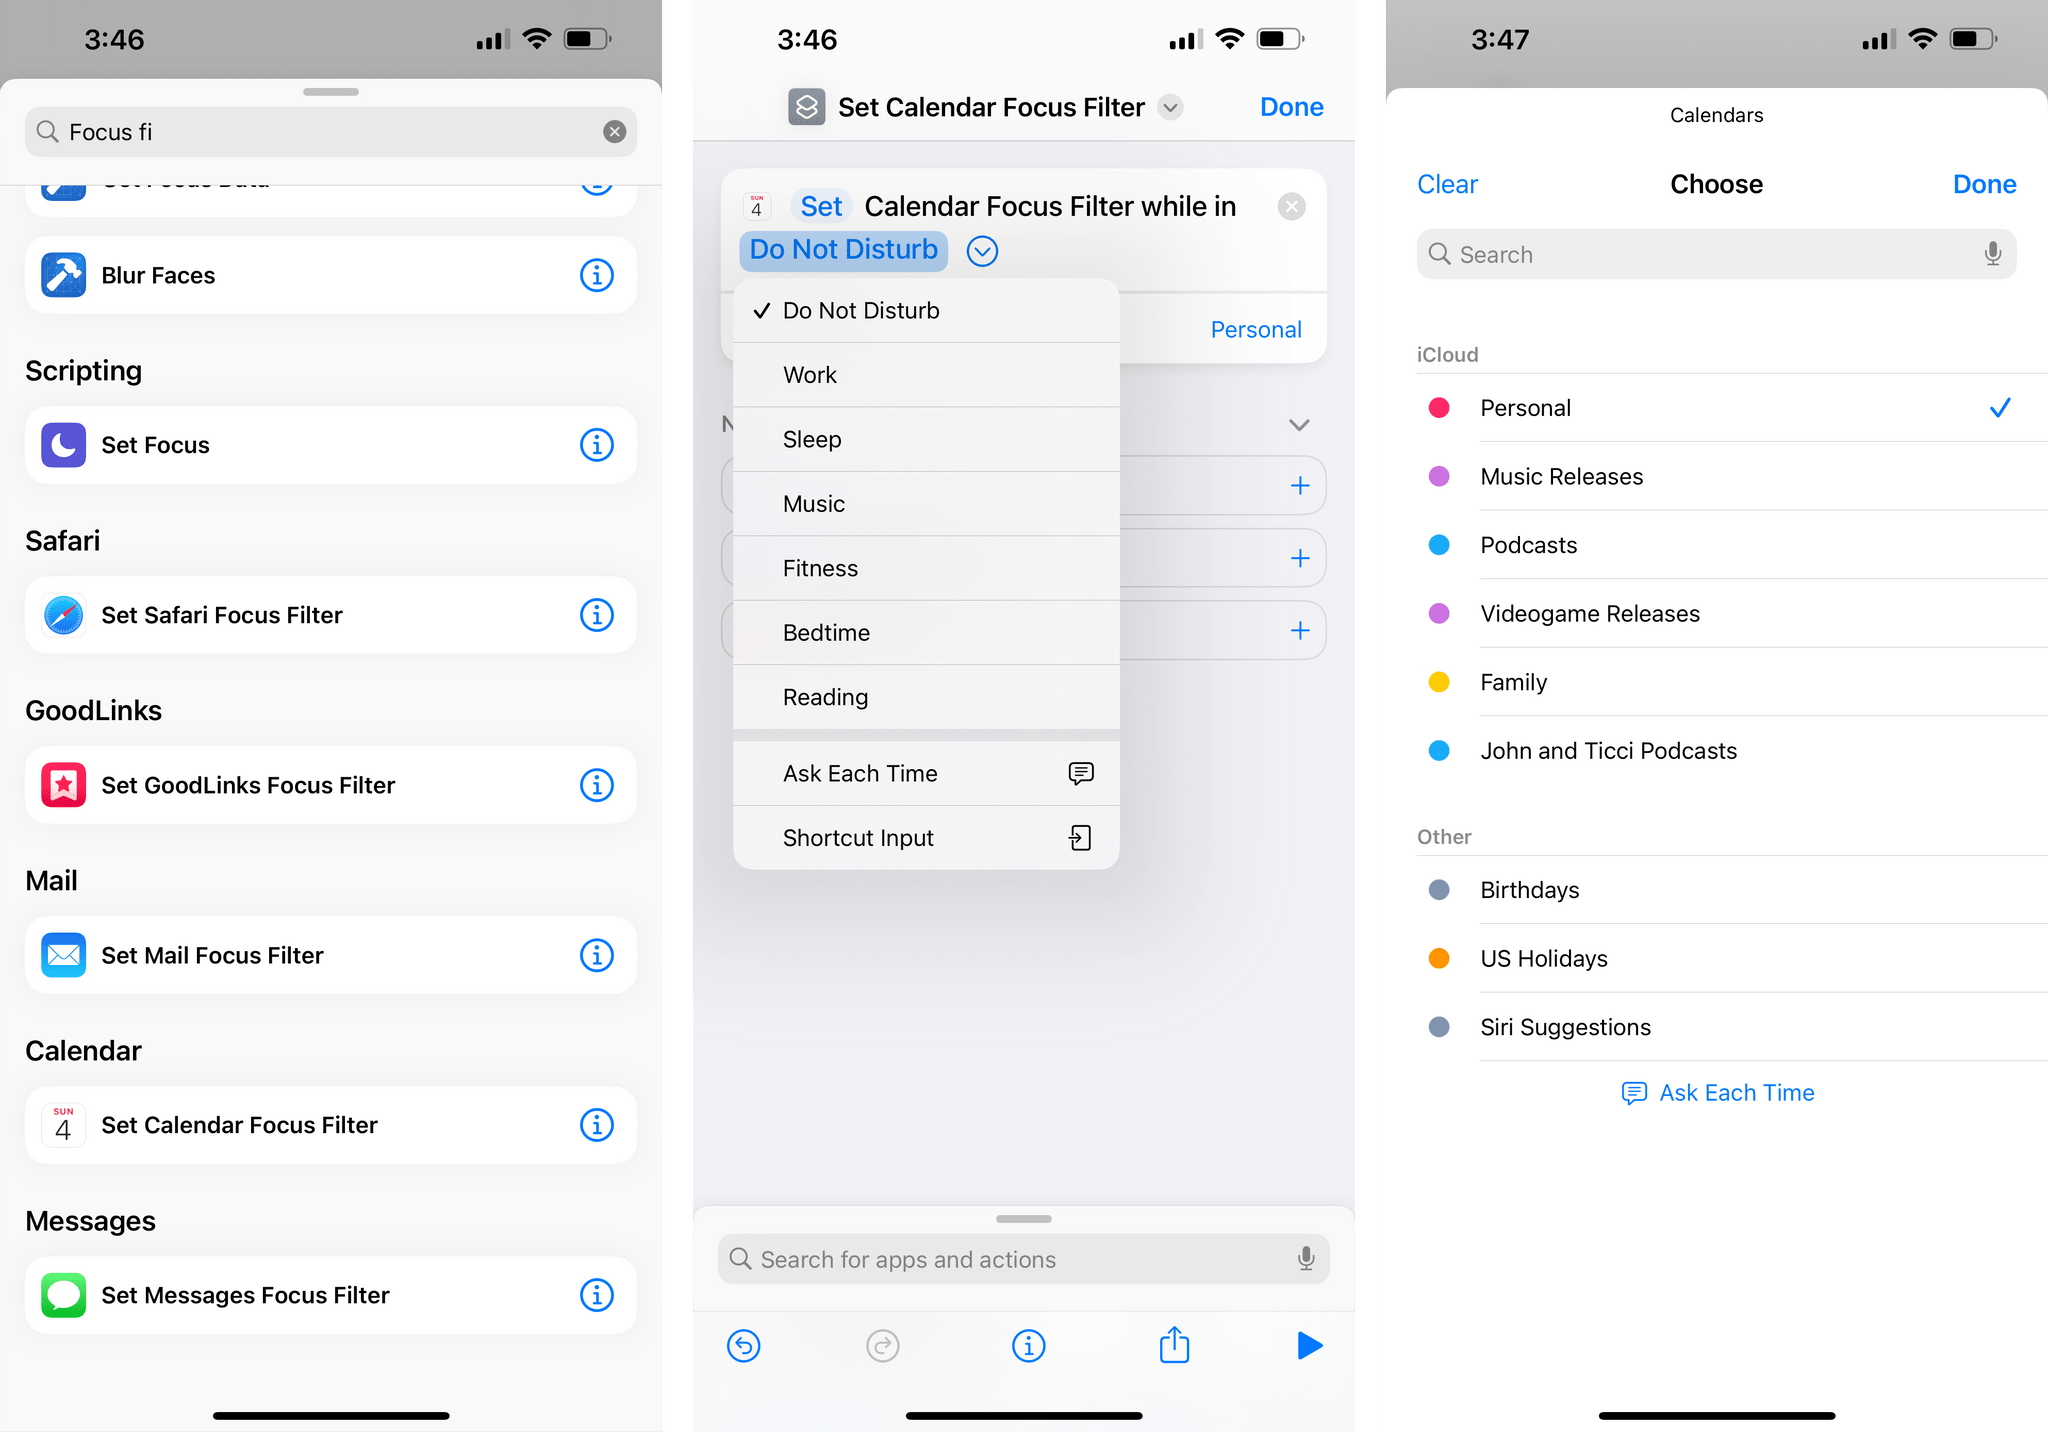 You can set Focus filters from the Shortcuts app too since the feature is based on the same App Intents technology used by Shortcuts.